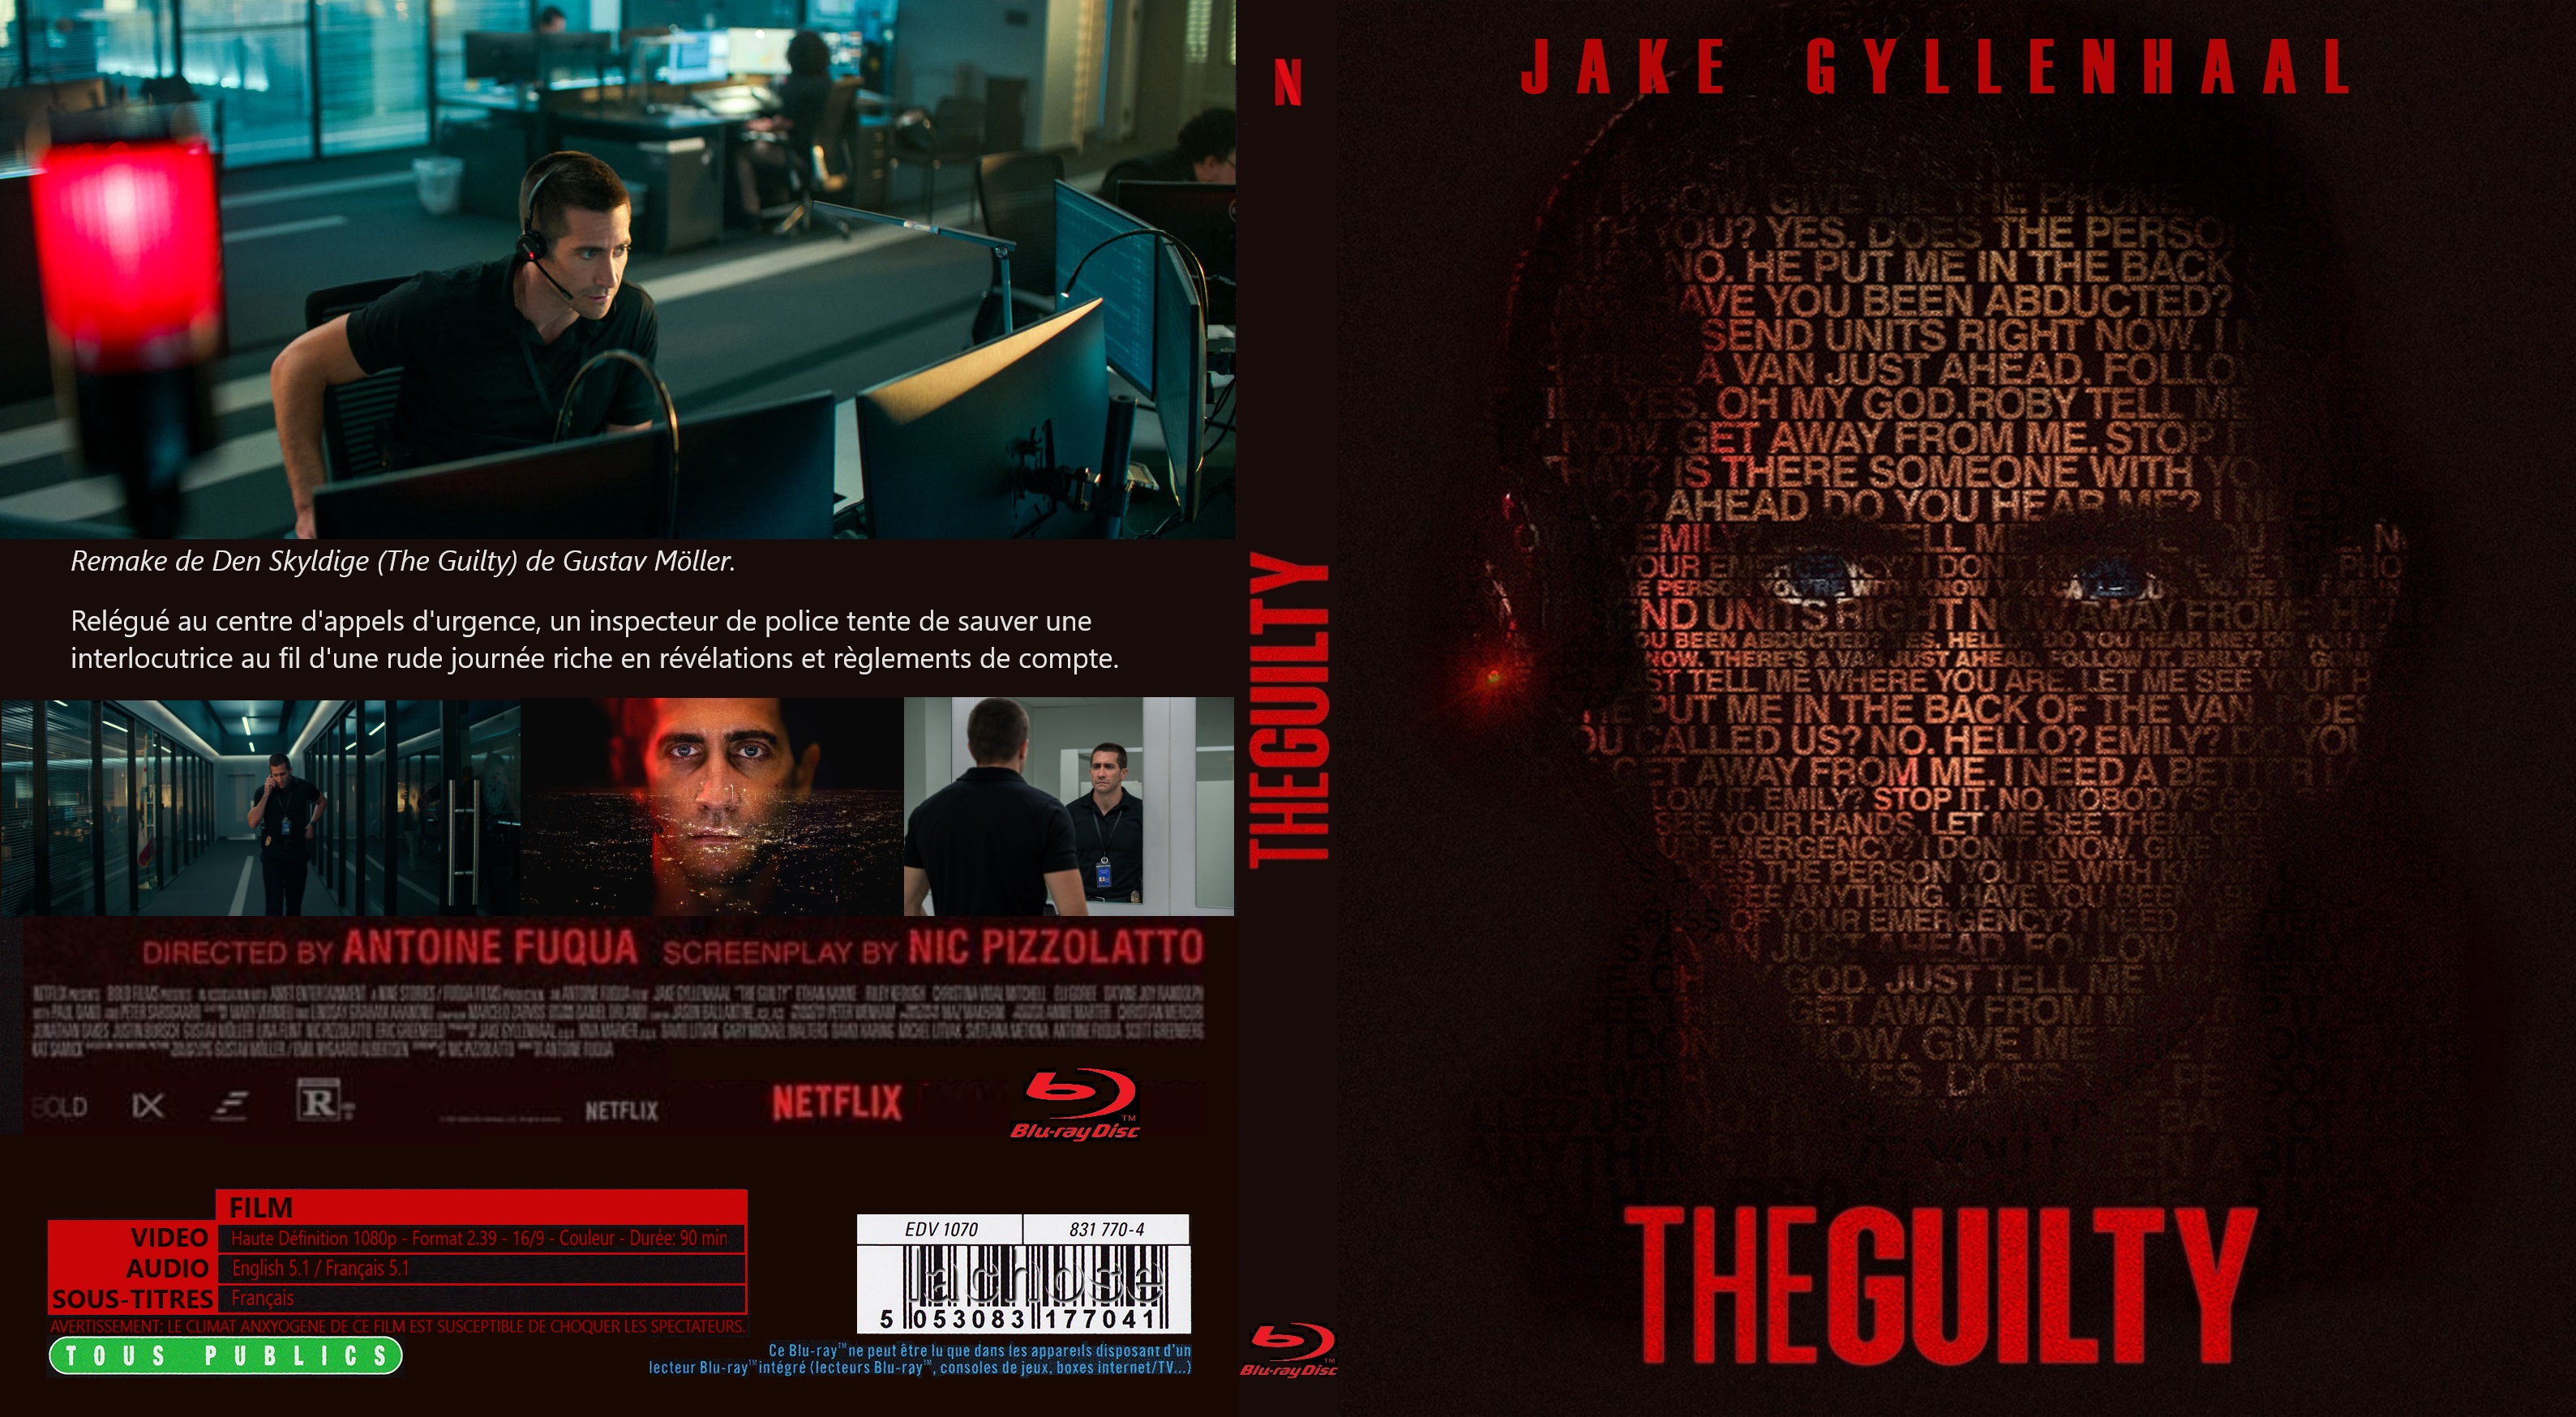 Jaquette DVD The guilty 2021 custom (BLU-RAY)